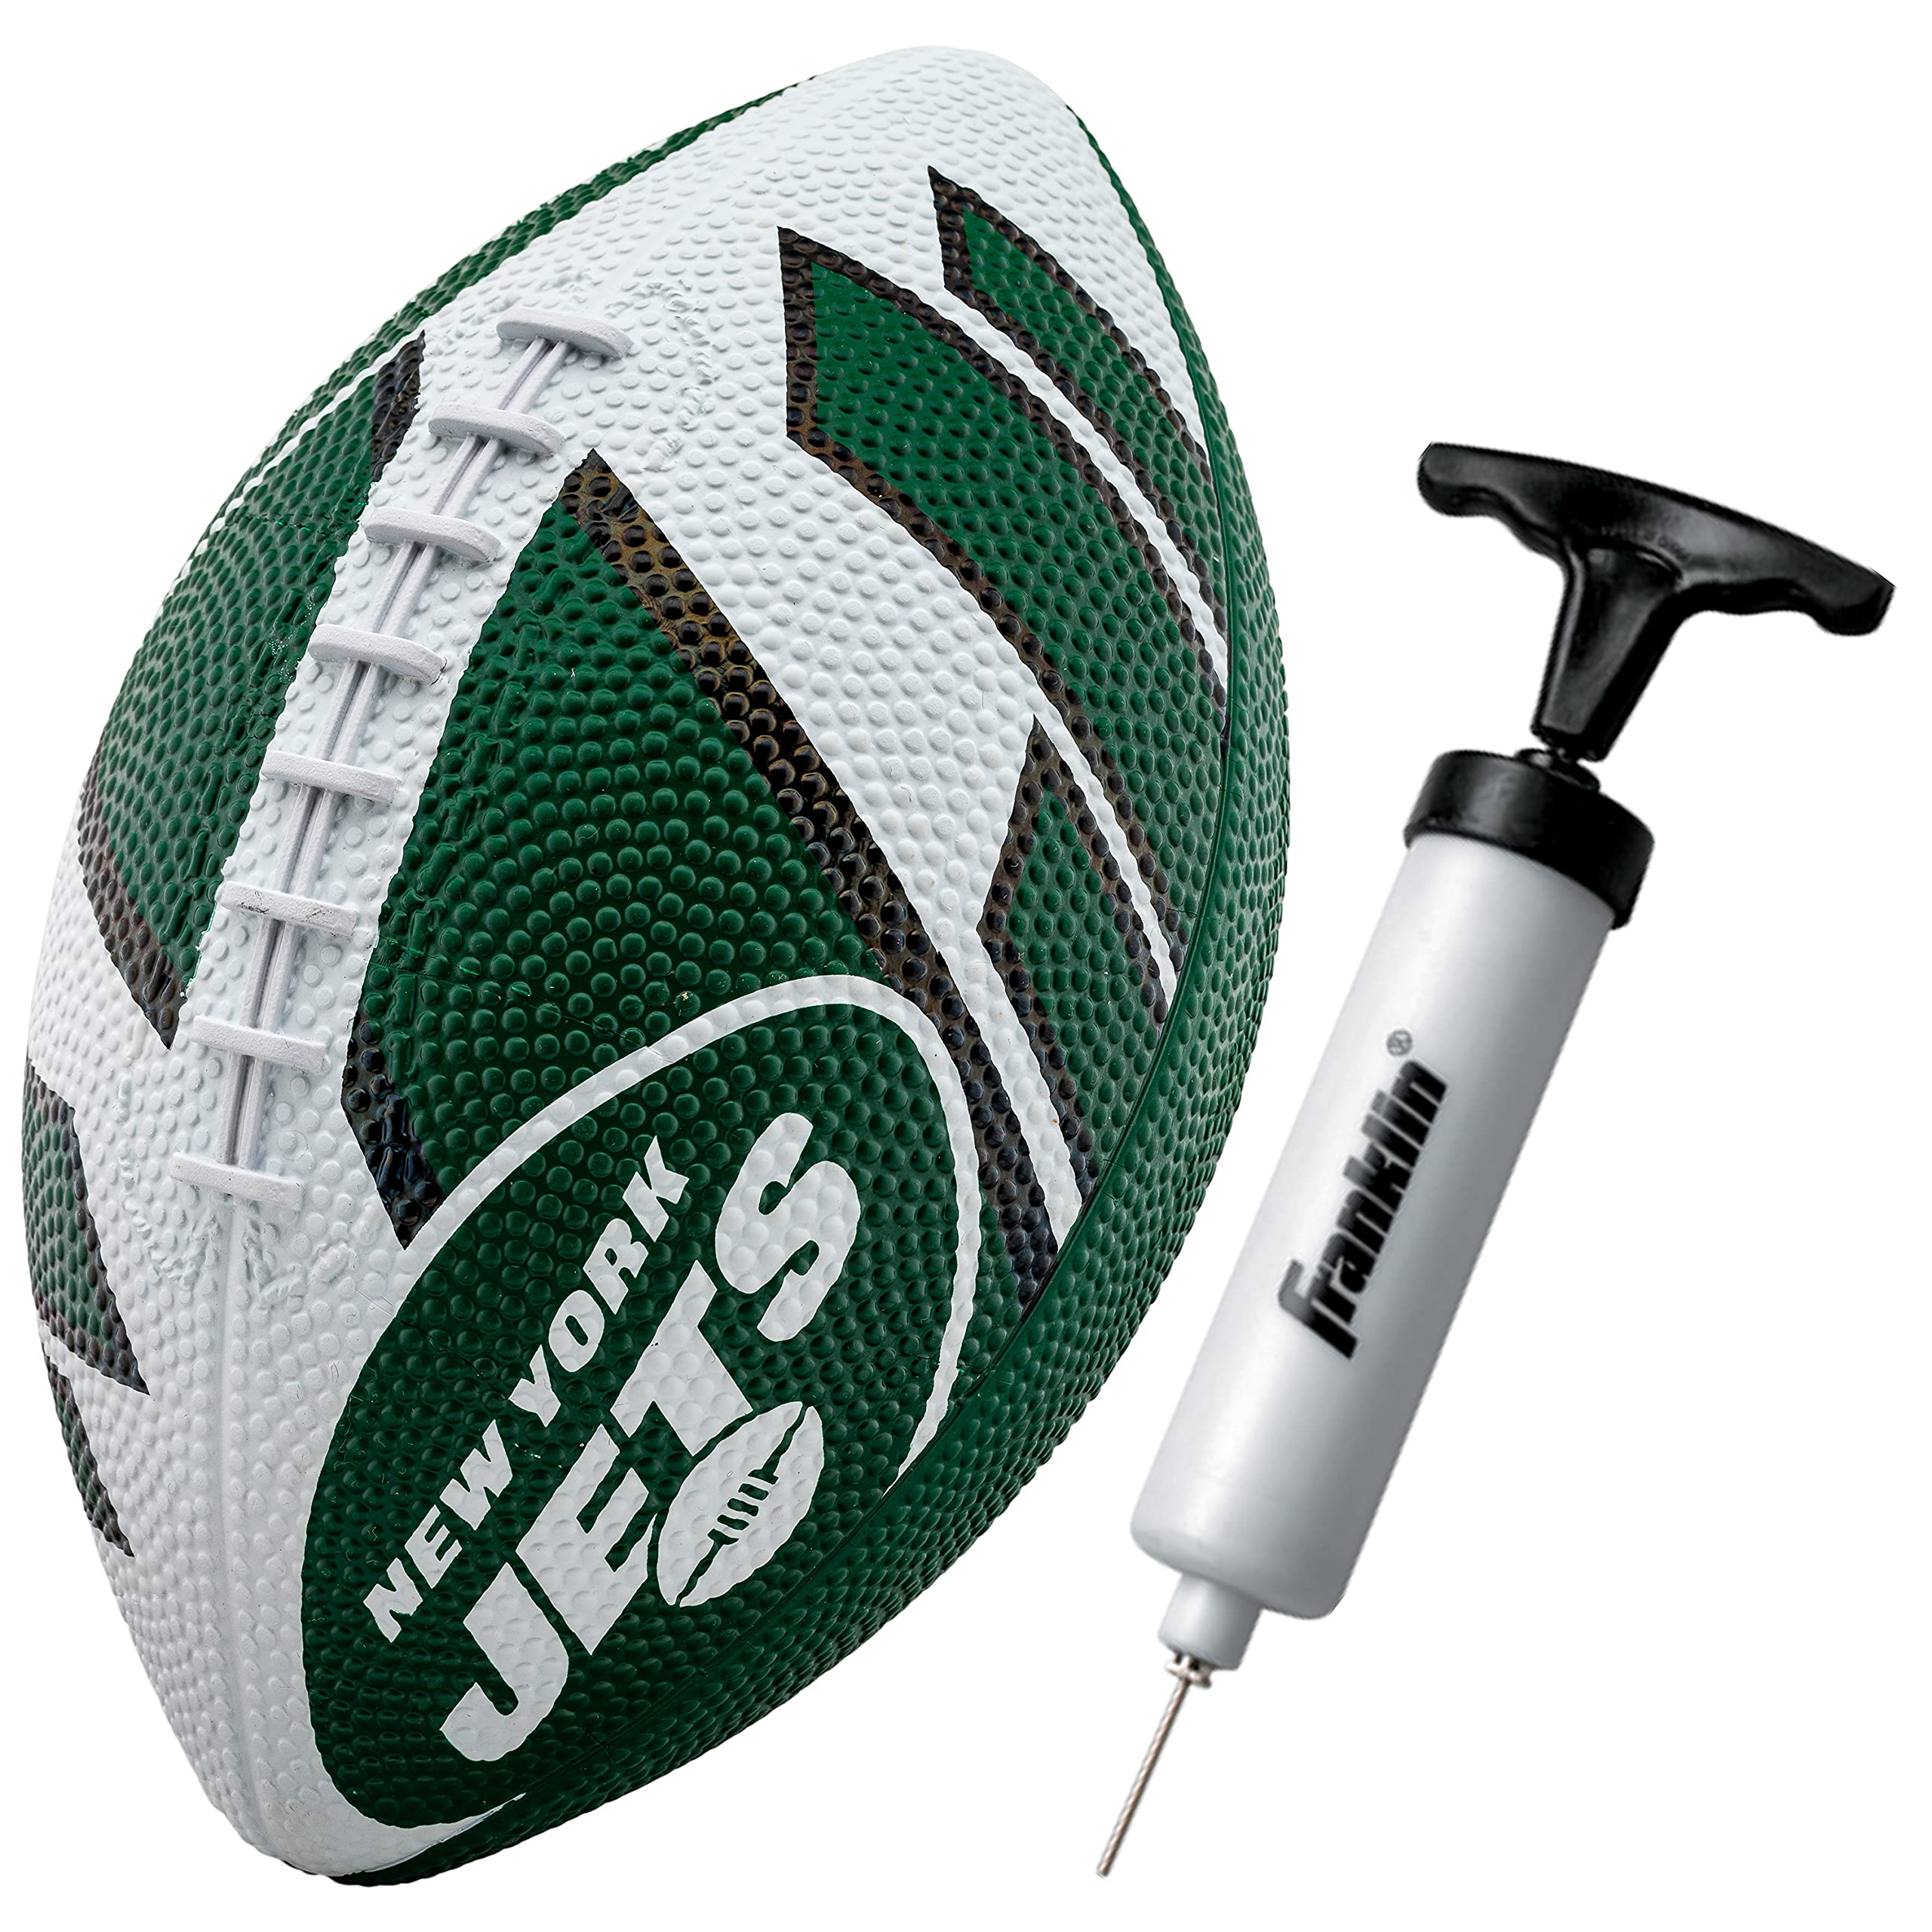 Franklin Sports Nfl New York Jets Football - Youth Football - Mini 85 Rubber Football - Perfect For Kids - Team Logos And Colors